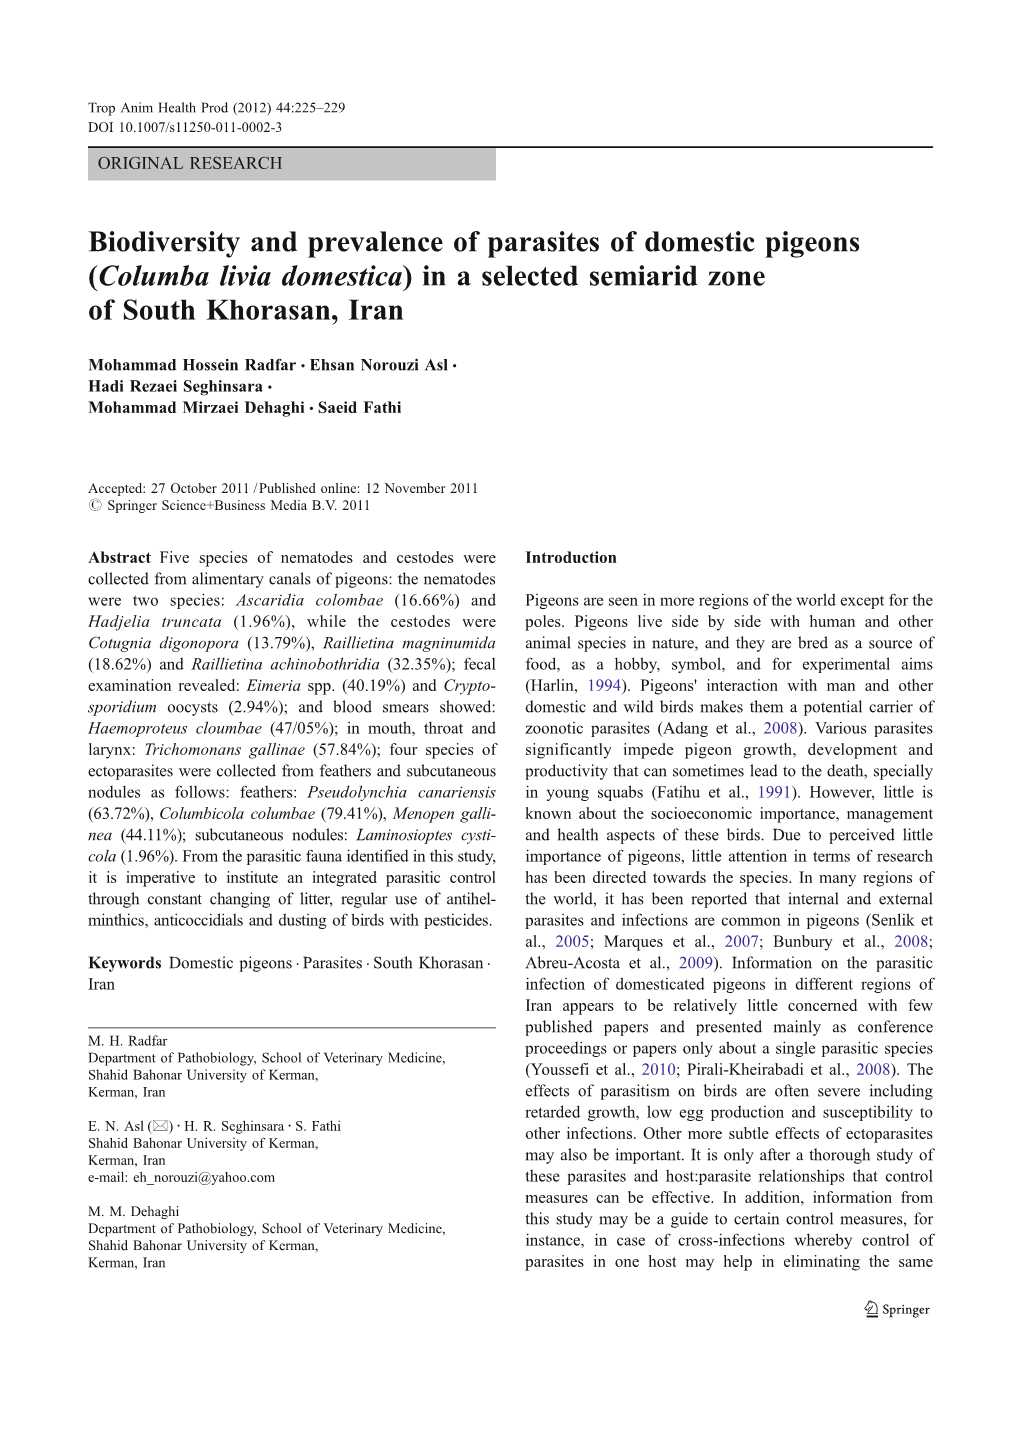 Biodiversity and Prevalence of Parasites of Domestic Pigeons (Columba Livia Domestica) in a Selected Semiarid Zone of South Khorasan, Iran